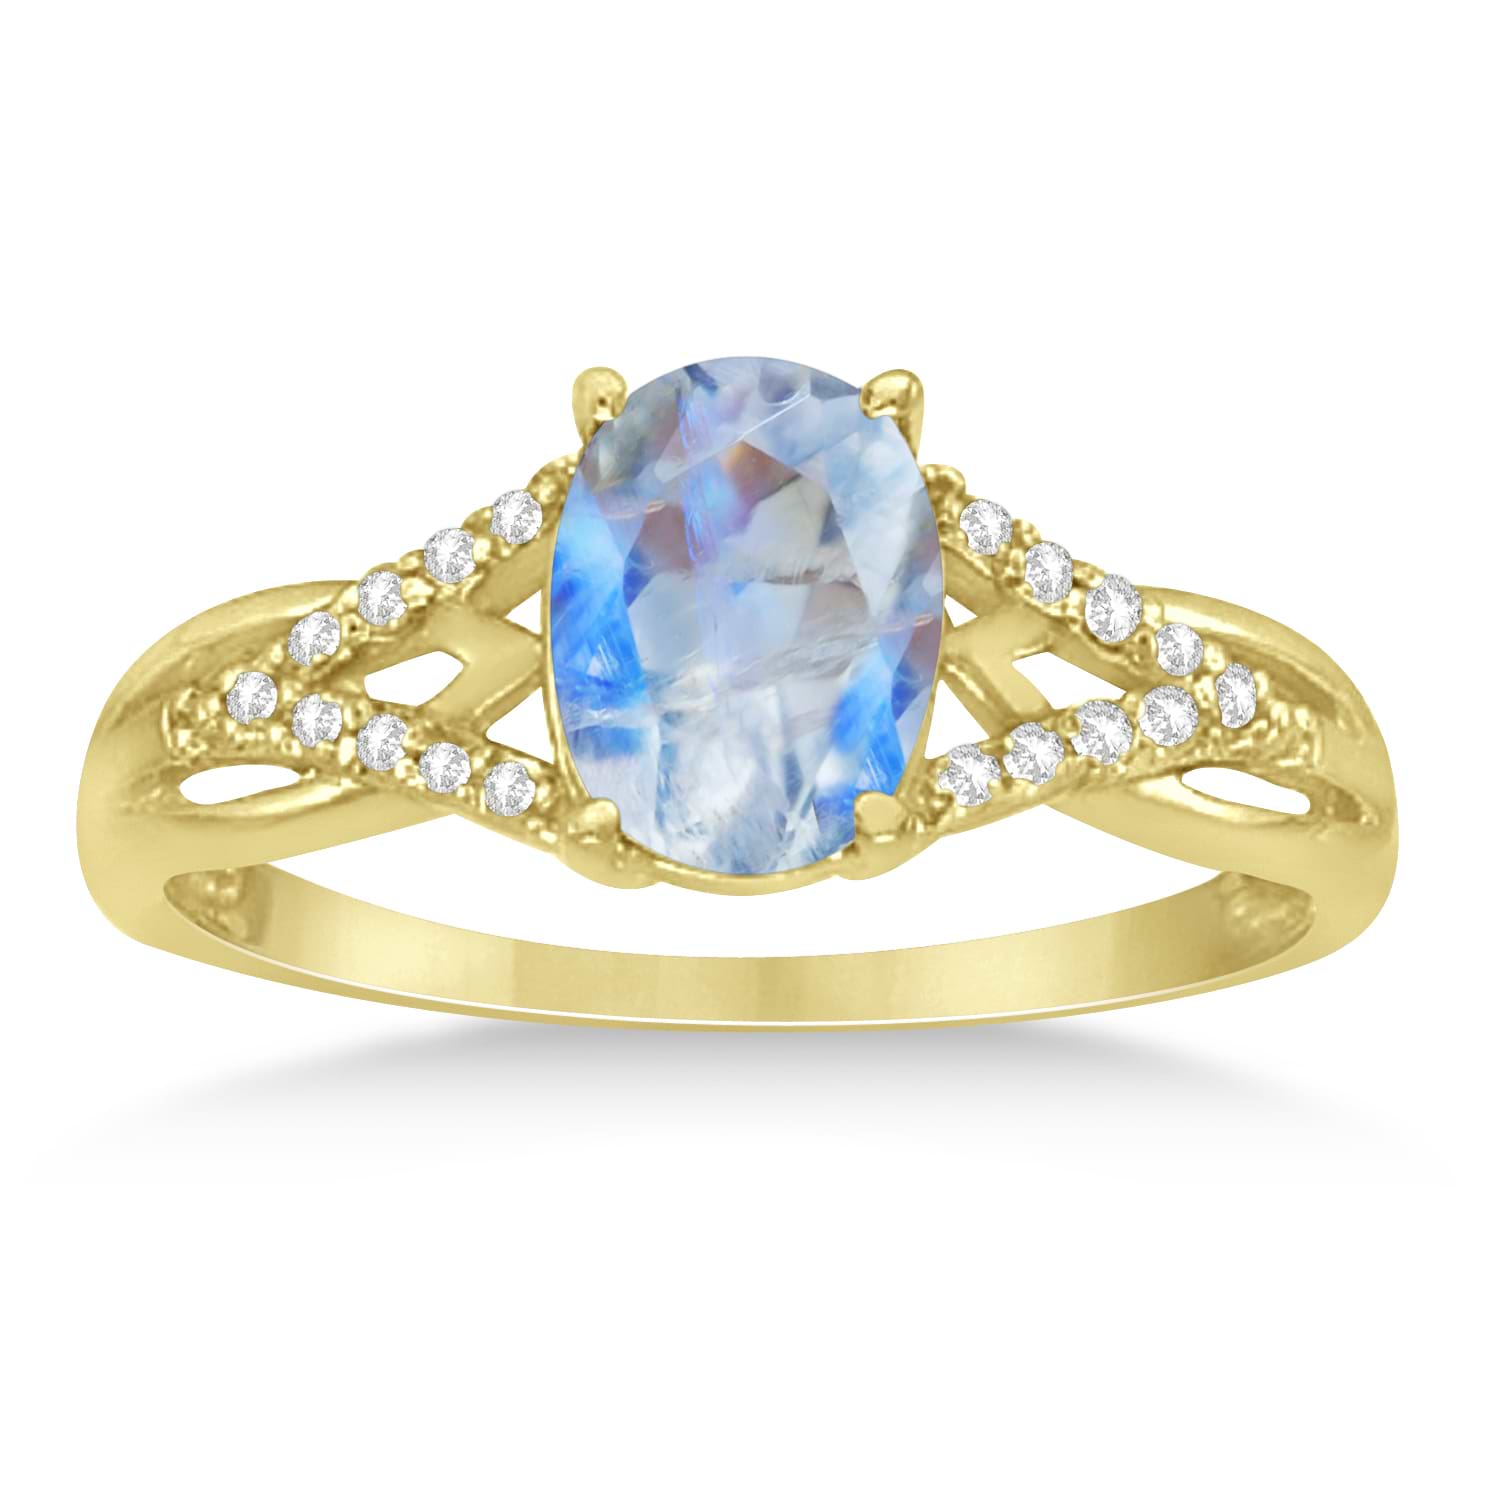 Oval Moonstone and Diamond Cocktail Ring 14K Yellow Gold (1.62tcw)